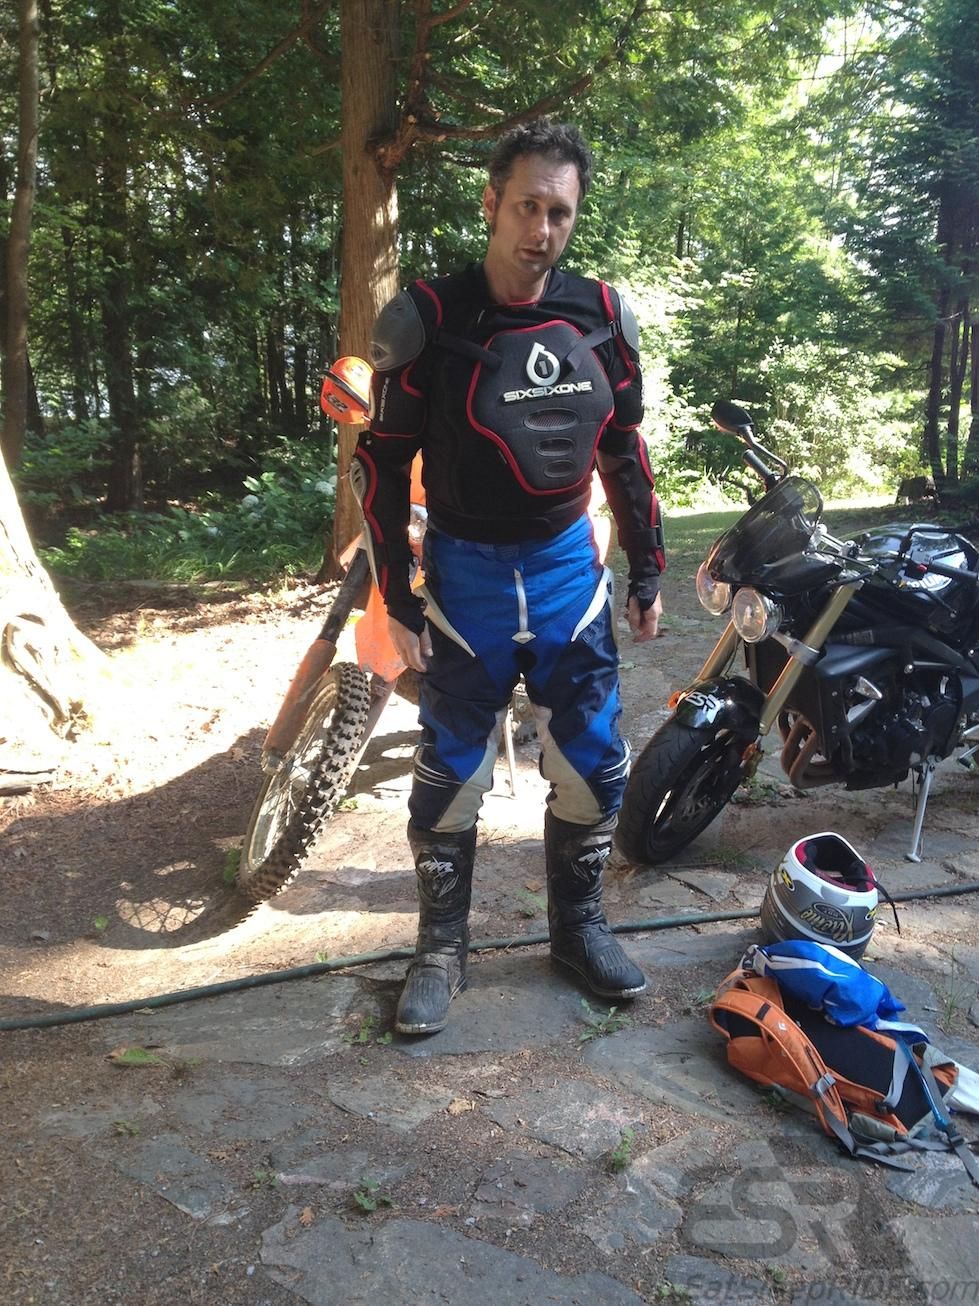 Suiting up to ride the trails